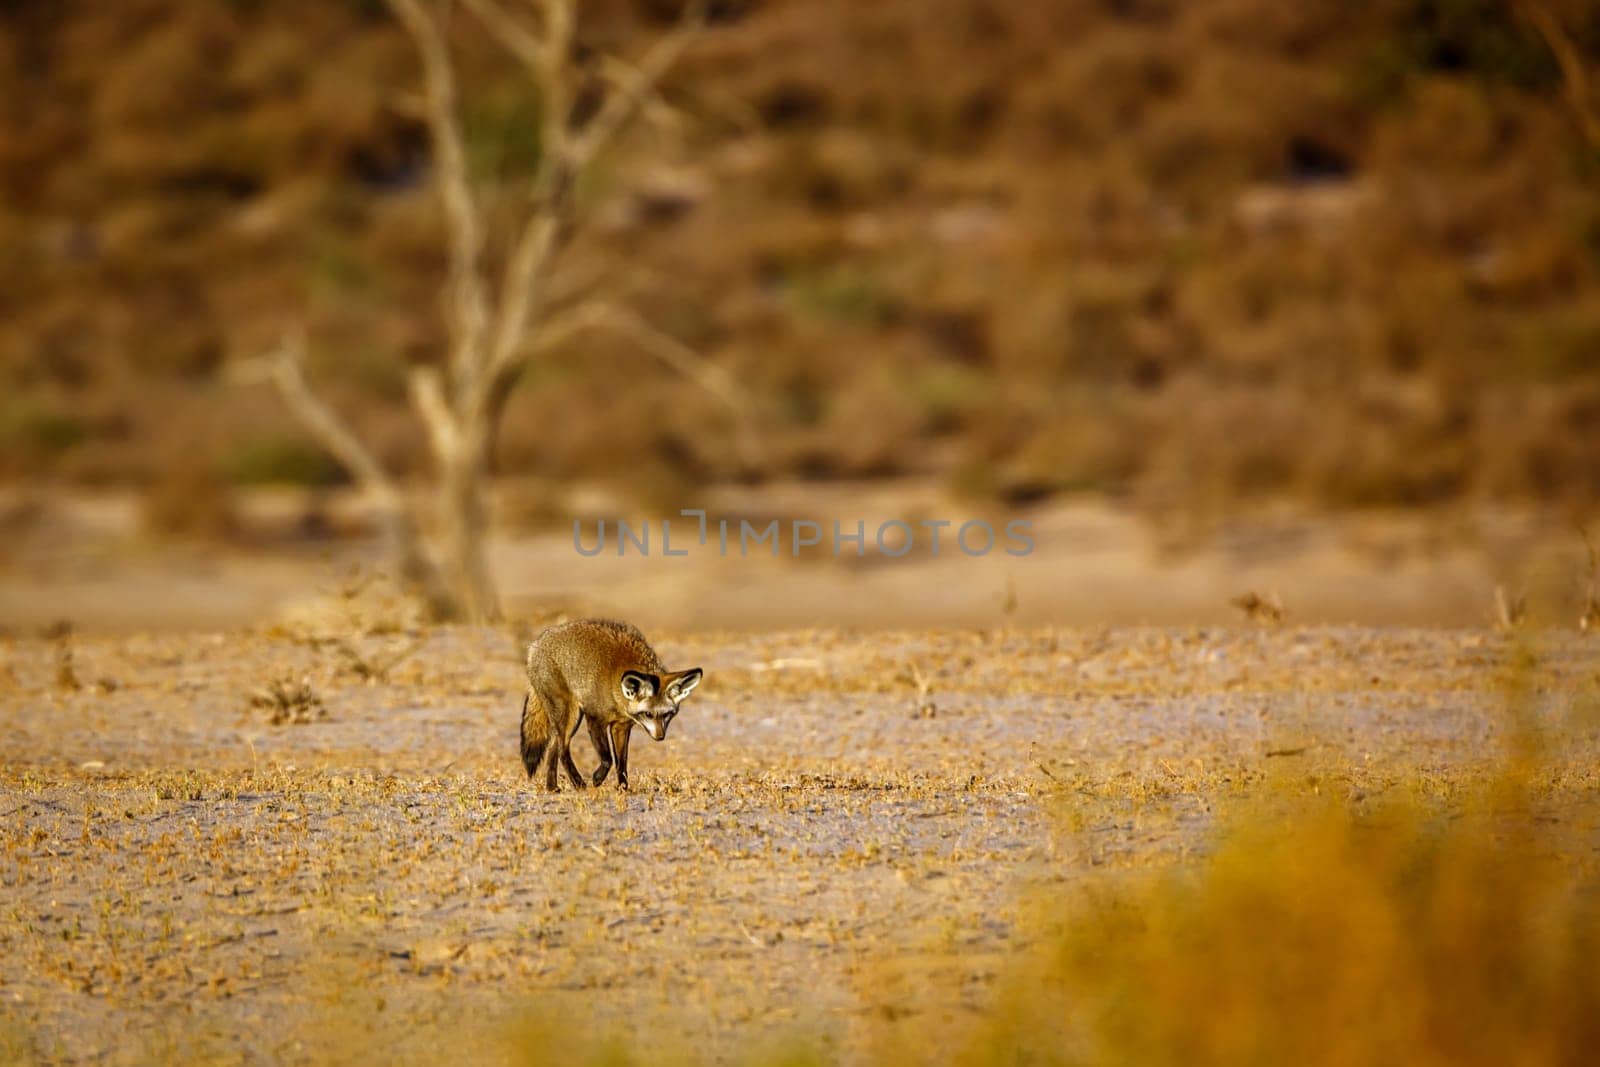 Bat eared fox in Kglalagadi transfrontier park, South Africa by PACOCOMO